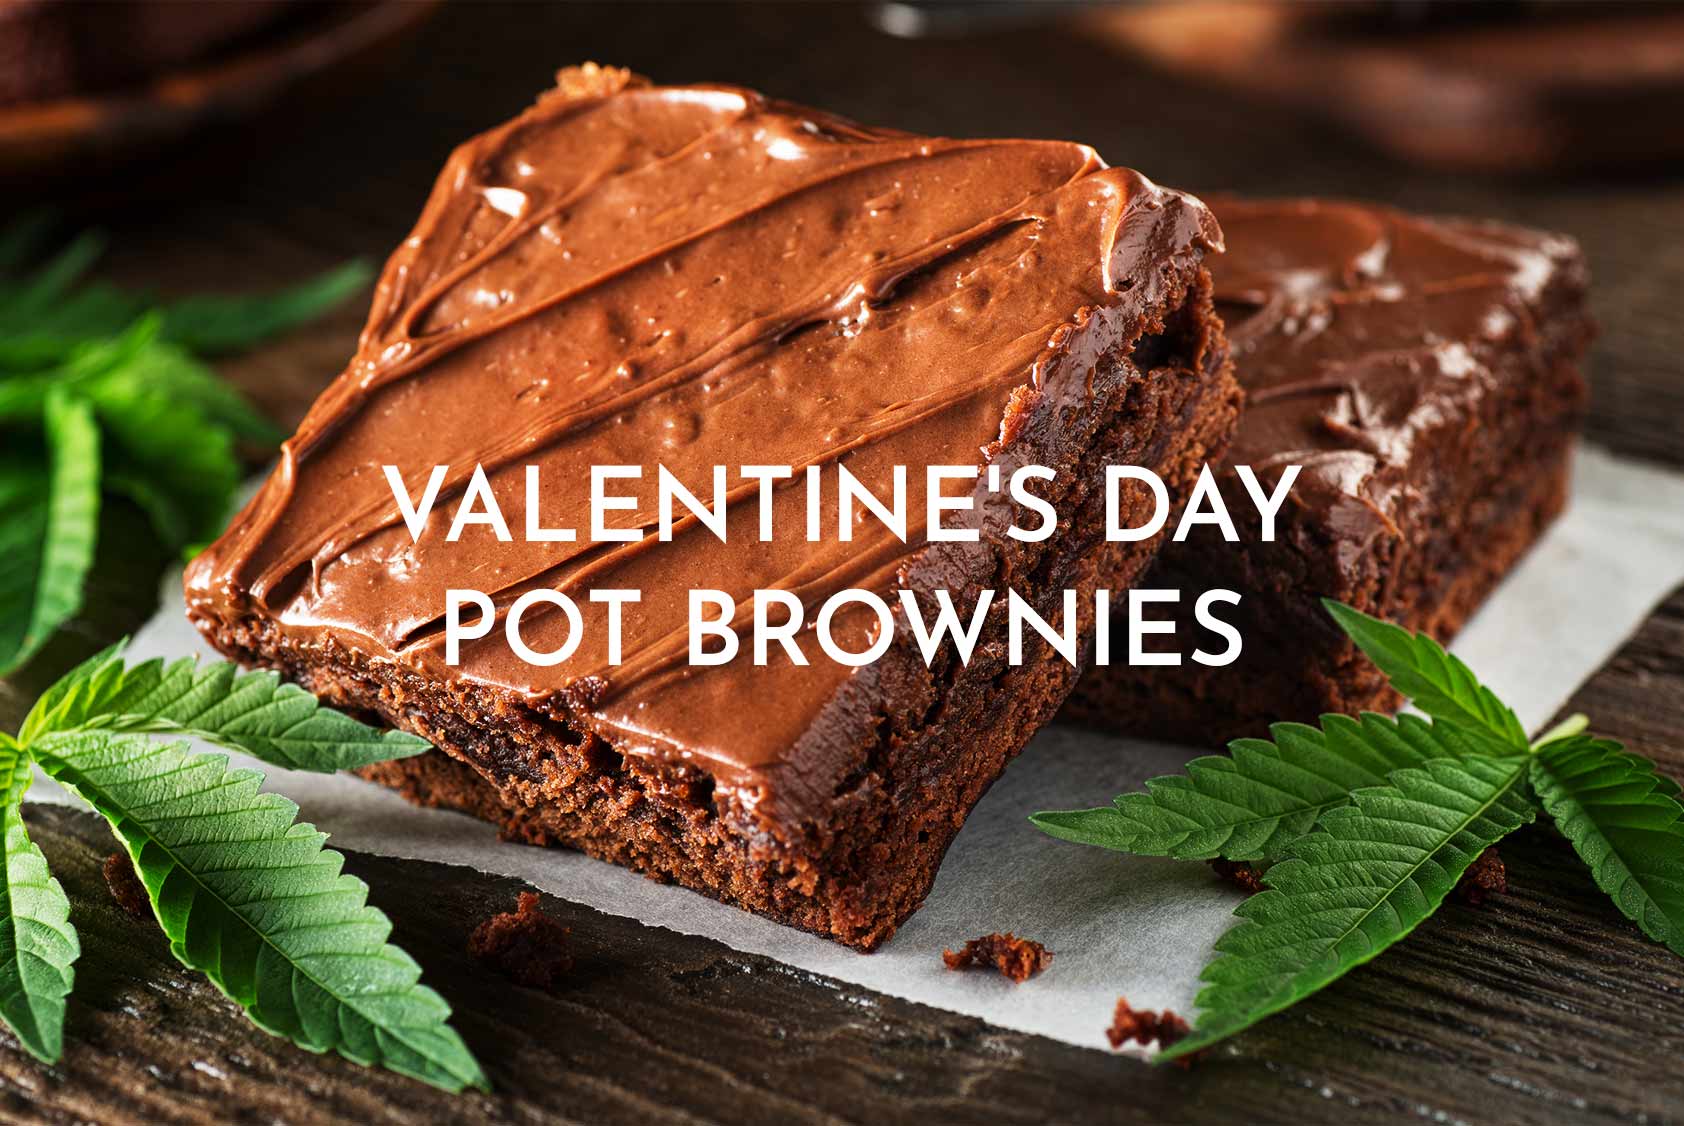 valentines day pot brownies recipe with delicious weed brownies